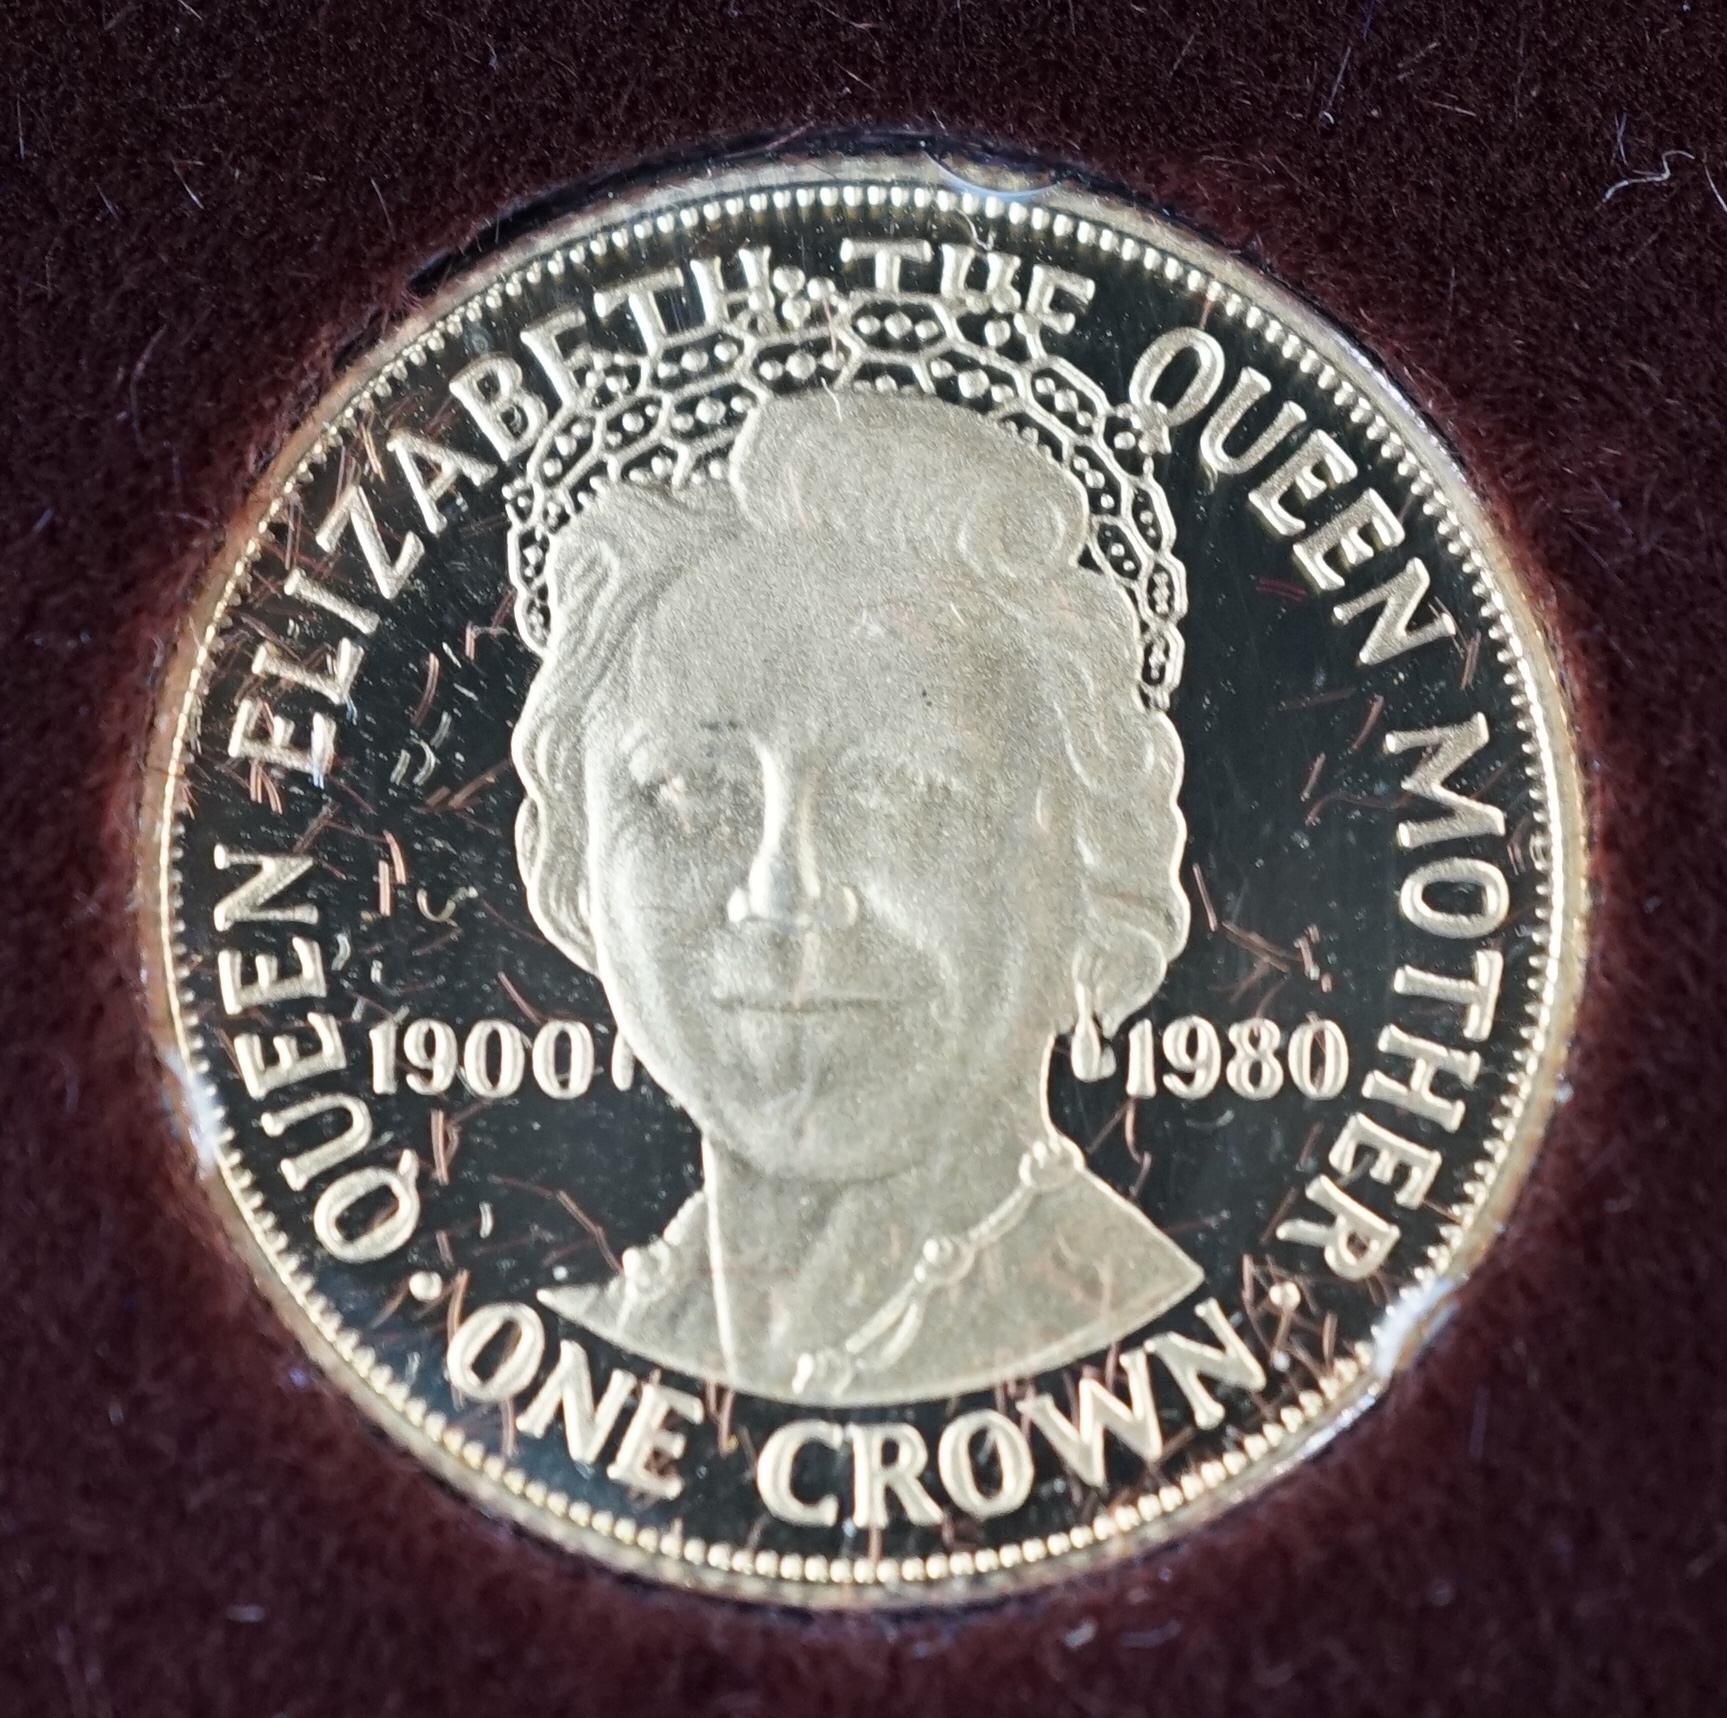 Gold coins, Isle of man, 22 carat gold Queen Mother crown, 1980, in case of issue with Pobjoy Mint certificate